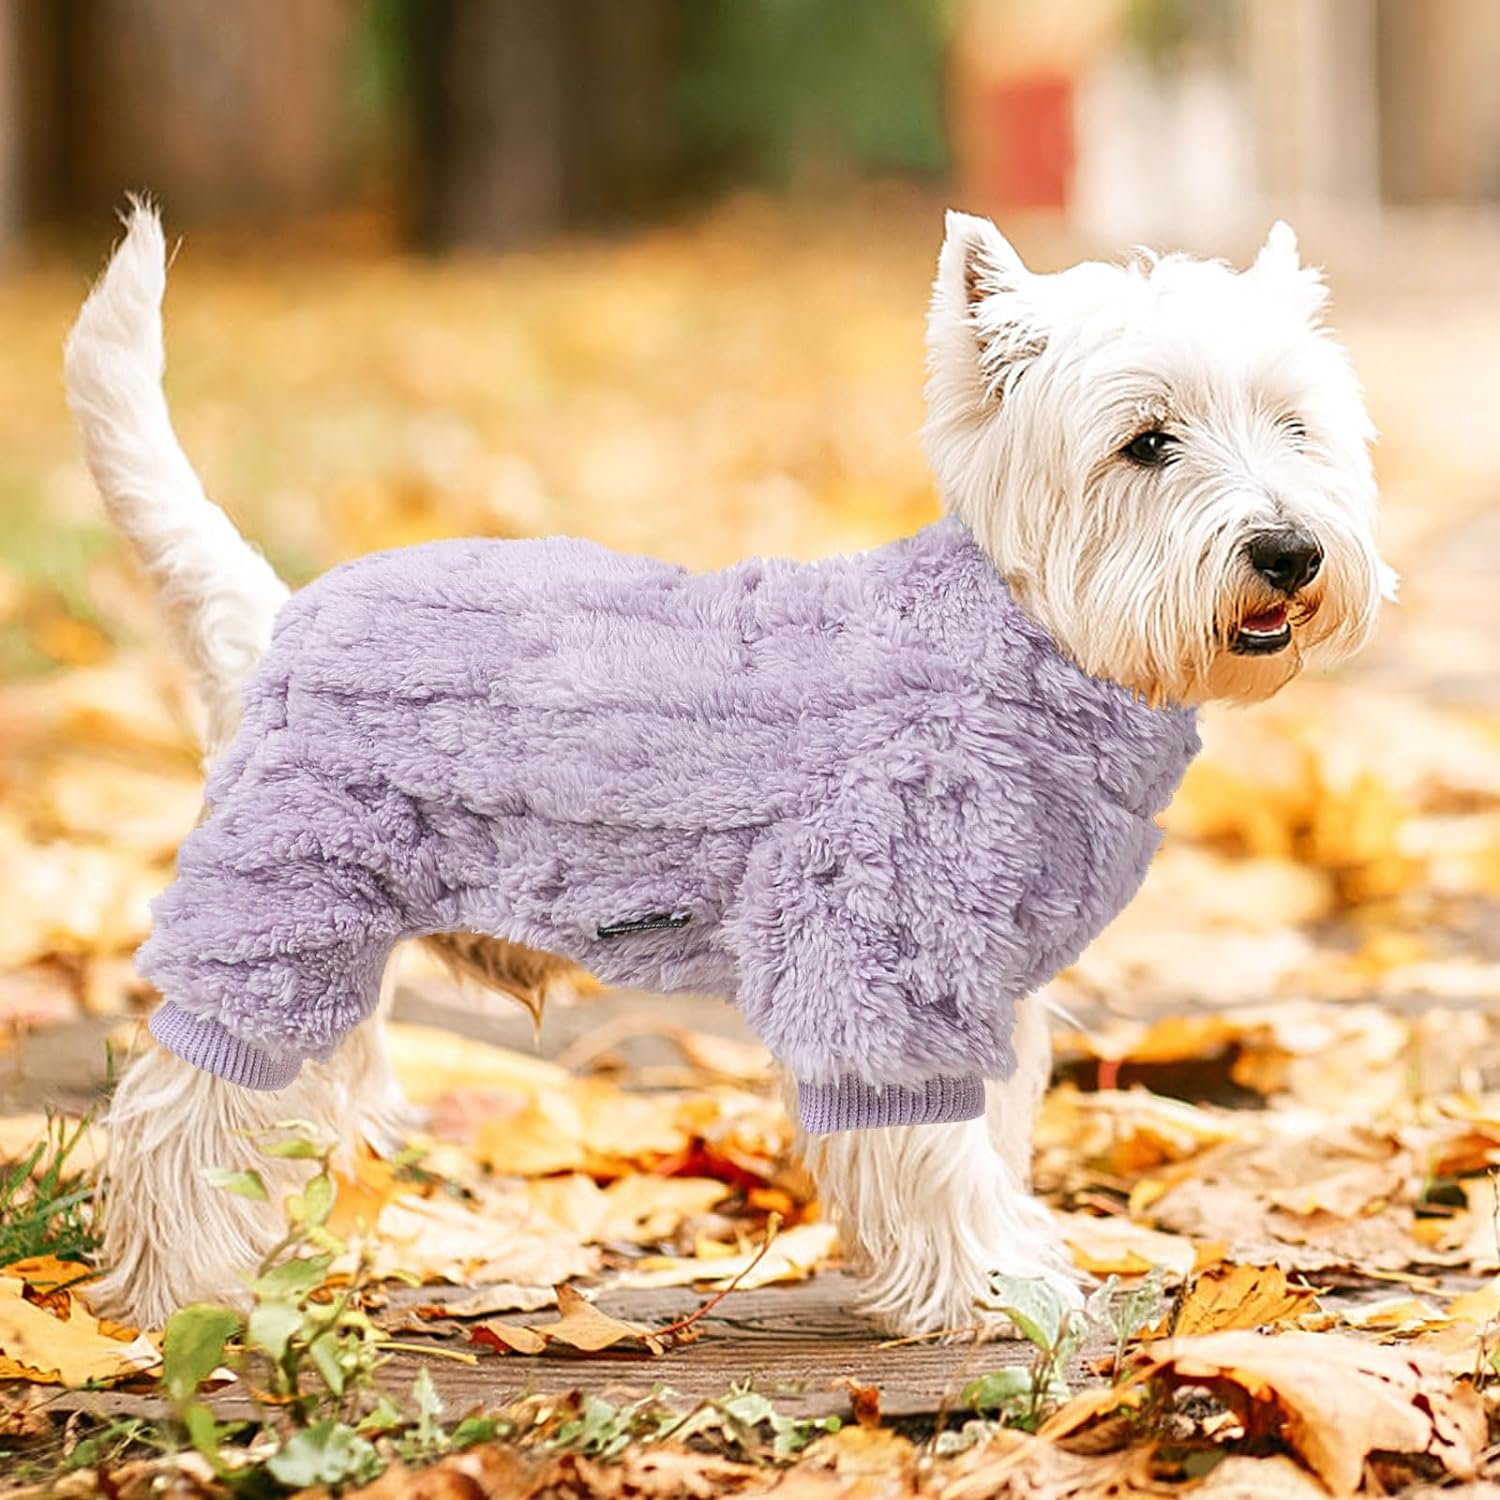 Dog Pajamas for Small Dogs Boy Girl, Turtleneck Pullover Sweater Thick Warm Clothes, Fleece Coat, Puppy Pjs Chihuahua Yorkie Fall Winter Thanksgiving Christmas Onesie Pet Outfit, XS, Purple